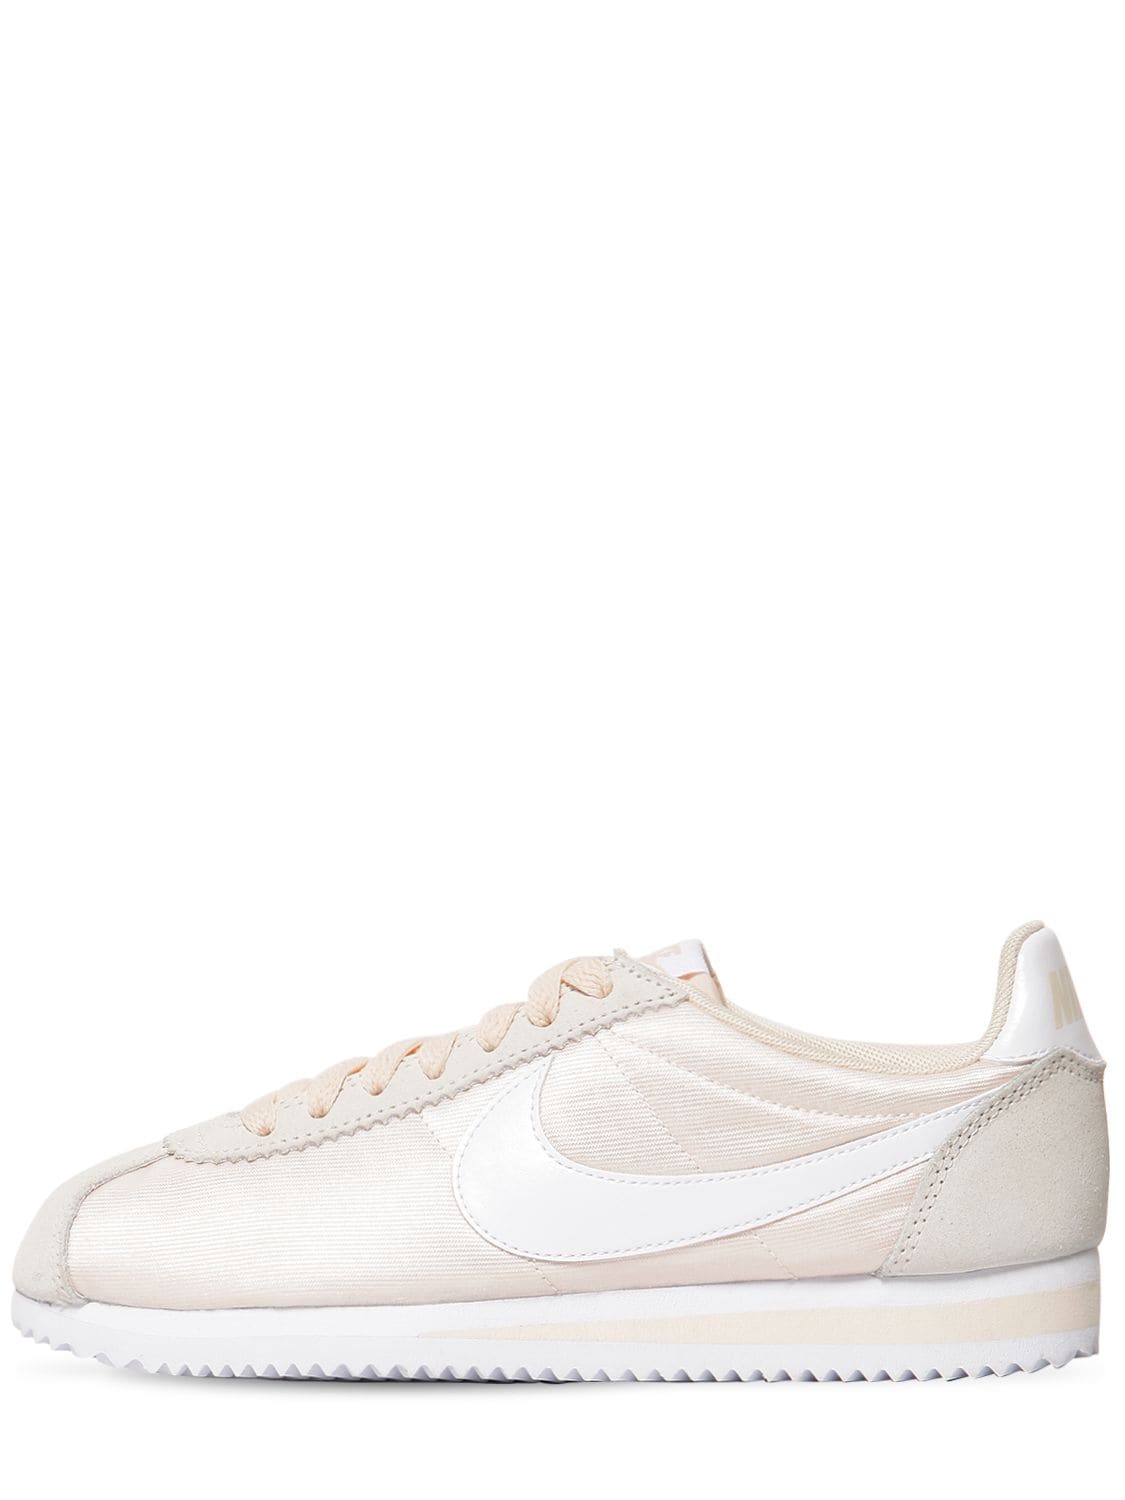 Nike Classic Cortez Nylon Sneakers In Light Pink